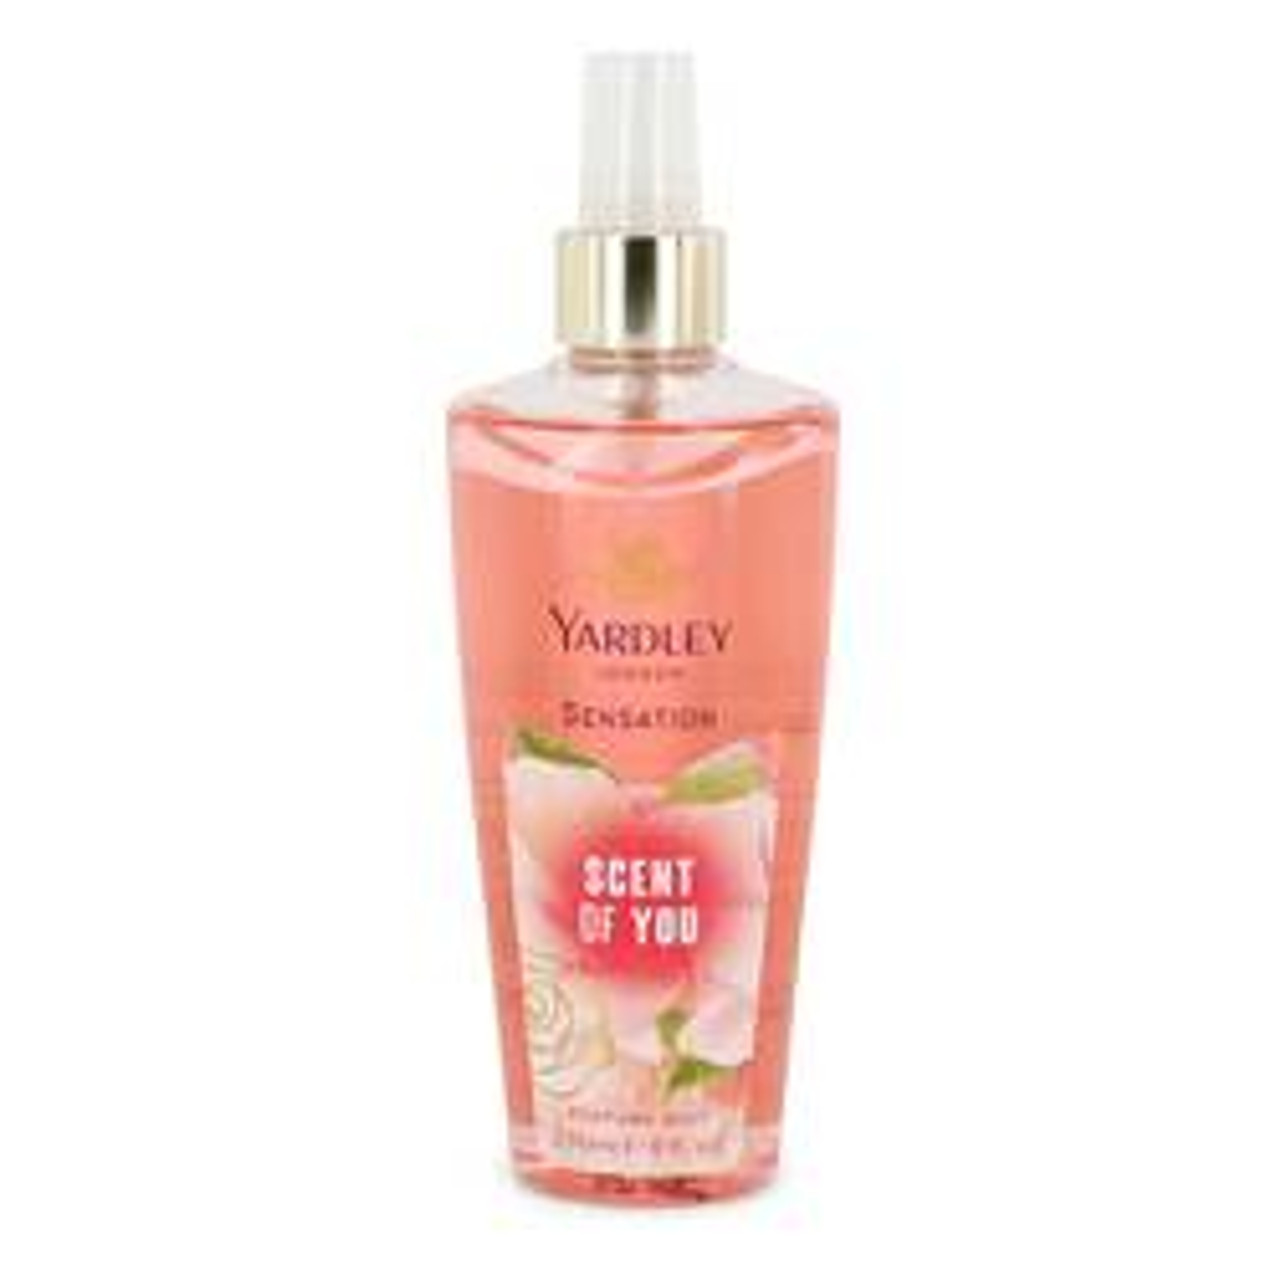 Yardley Scent Of You Perfume By Yardley London Perfume Mist 8 oz for Women - [From 31.00 - Choose pk Qty ] - *Ships from Miami